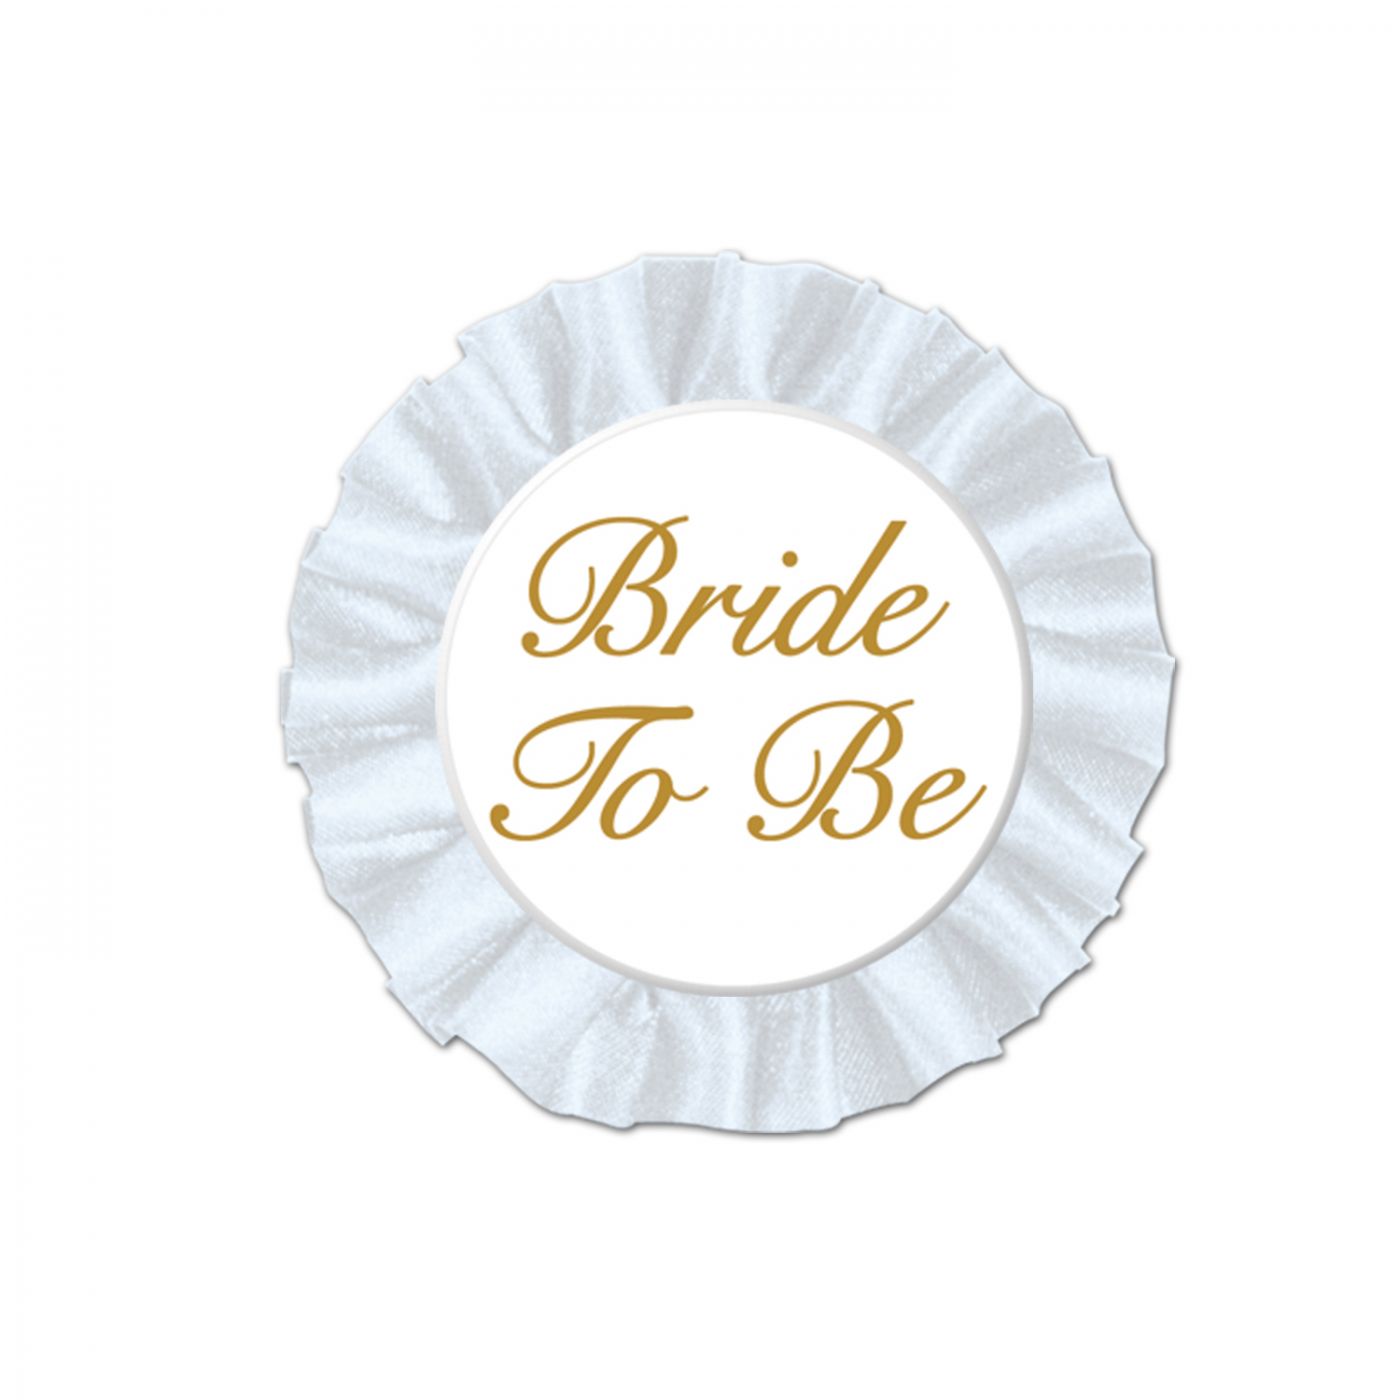 Bride To Be Satin Button (12) image